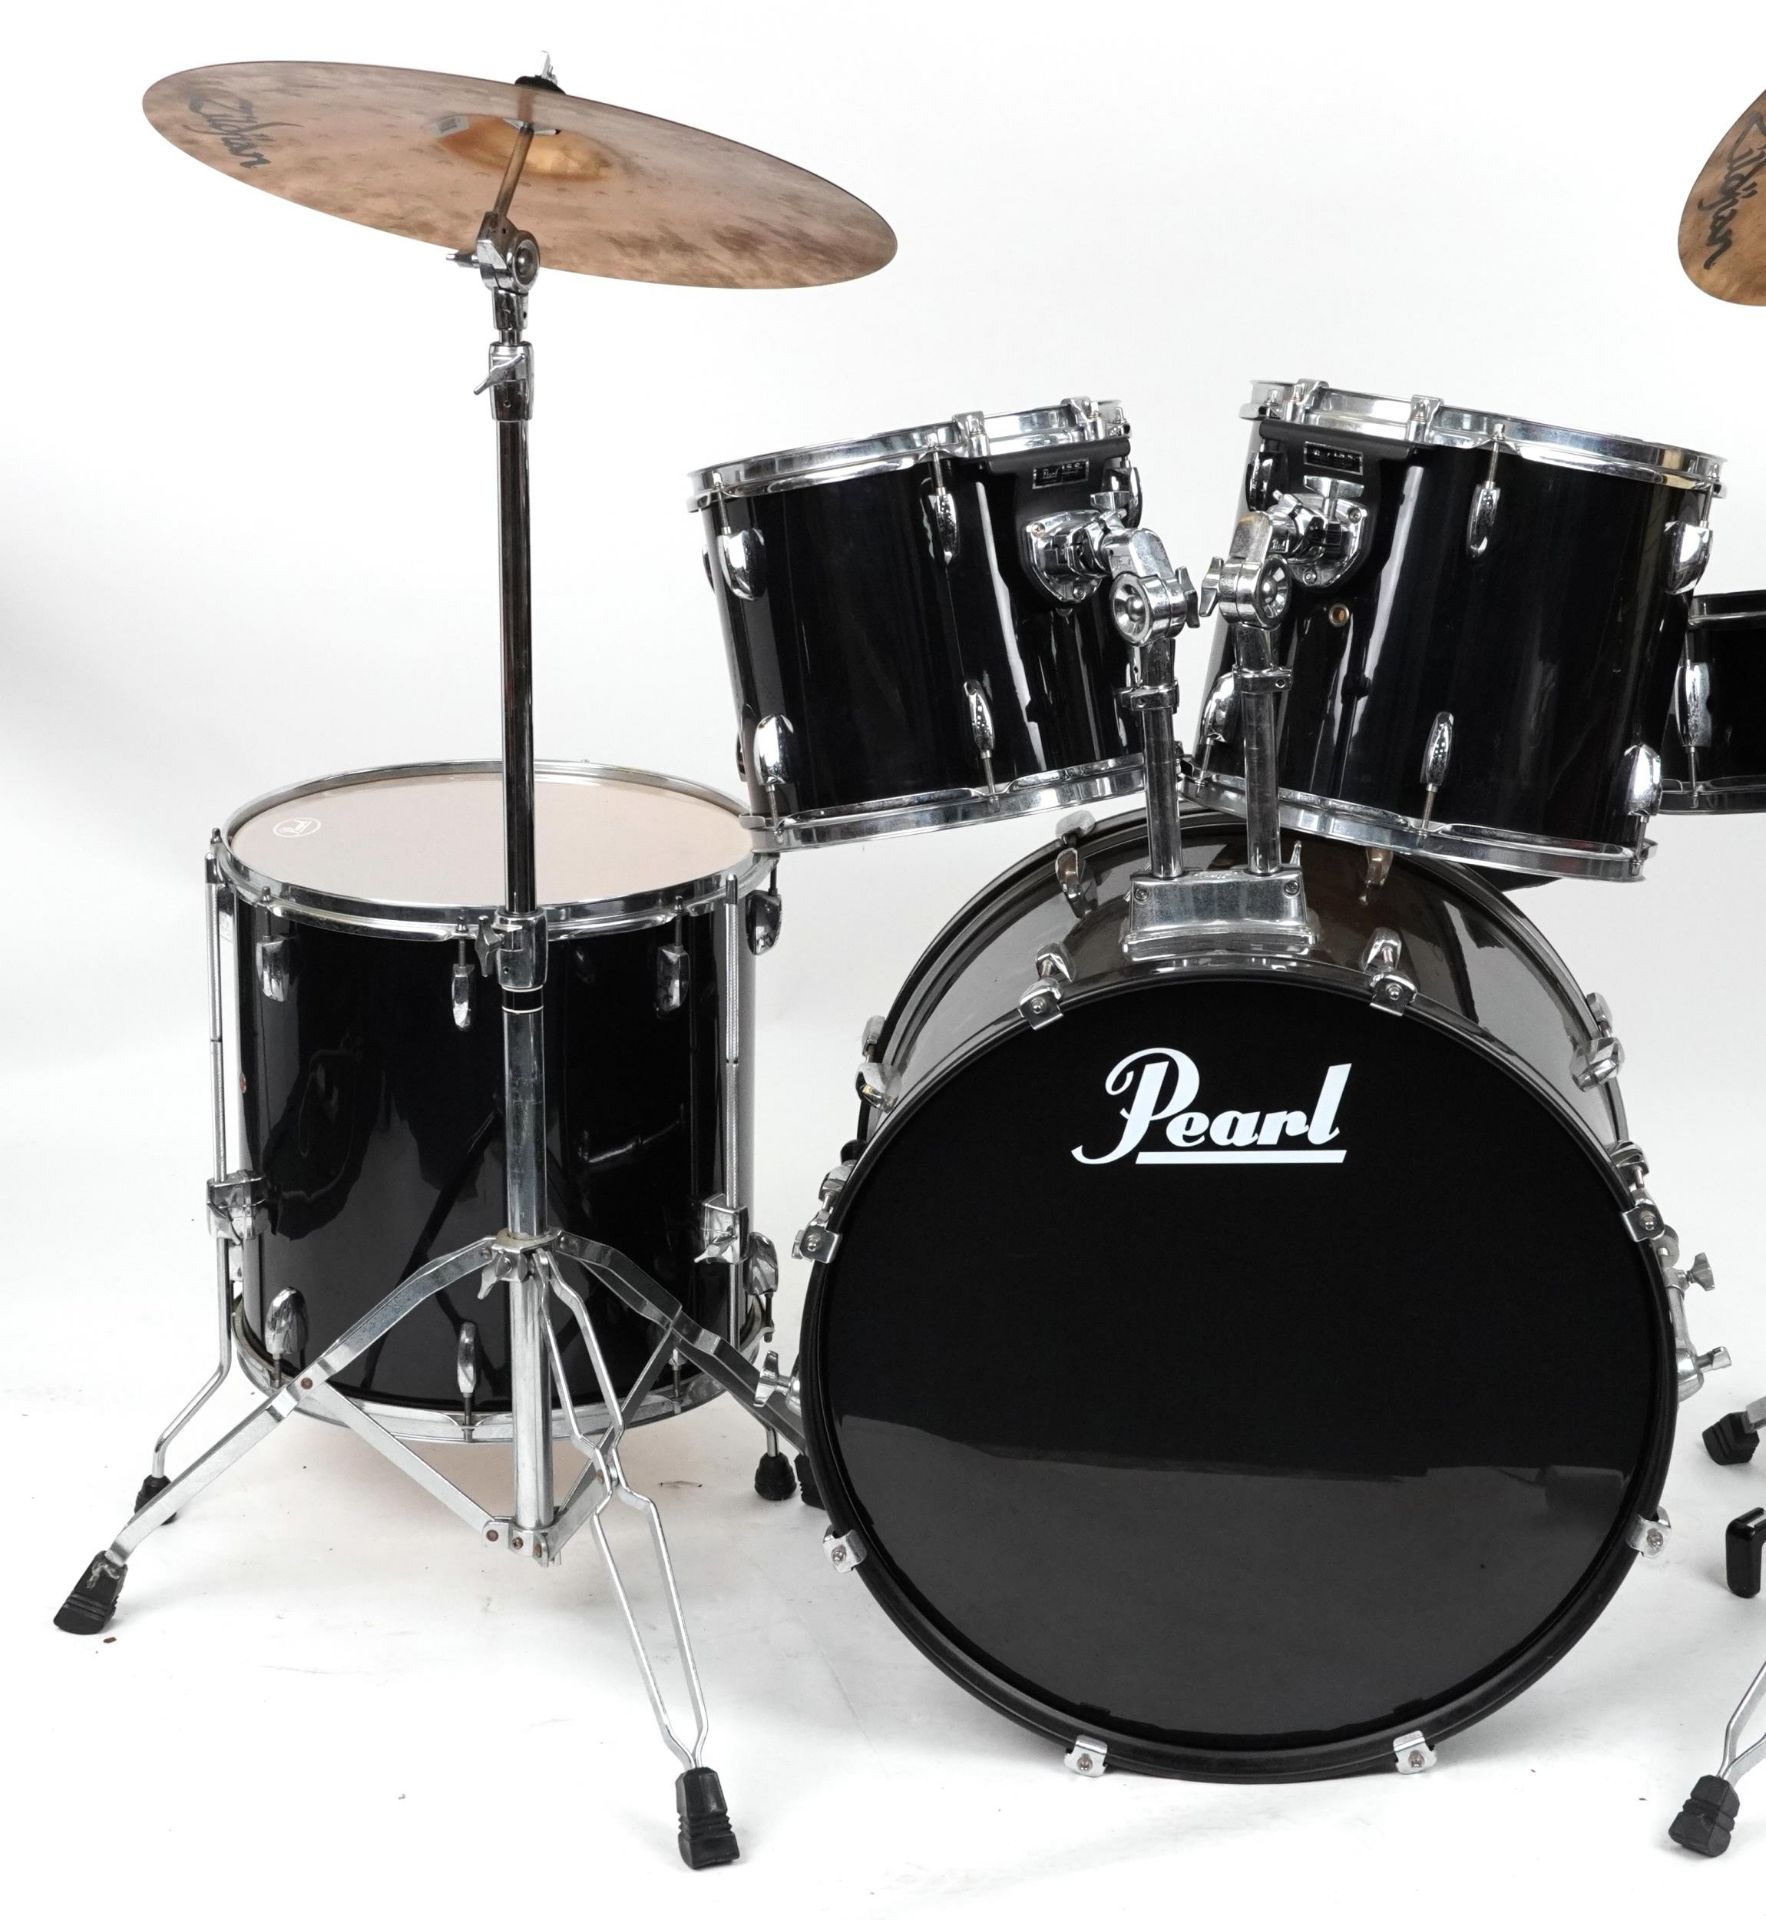 Pearl drum kit with Pearl Speed seat and Zildjian symbols including base drum : For further - Image 2 of 5